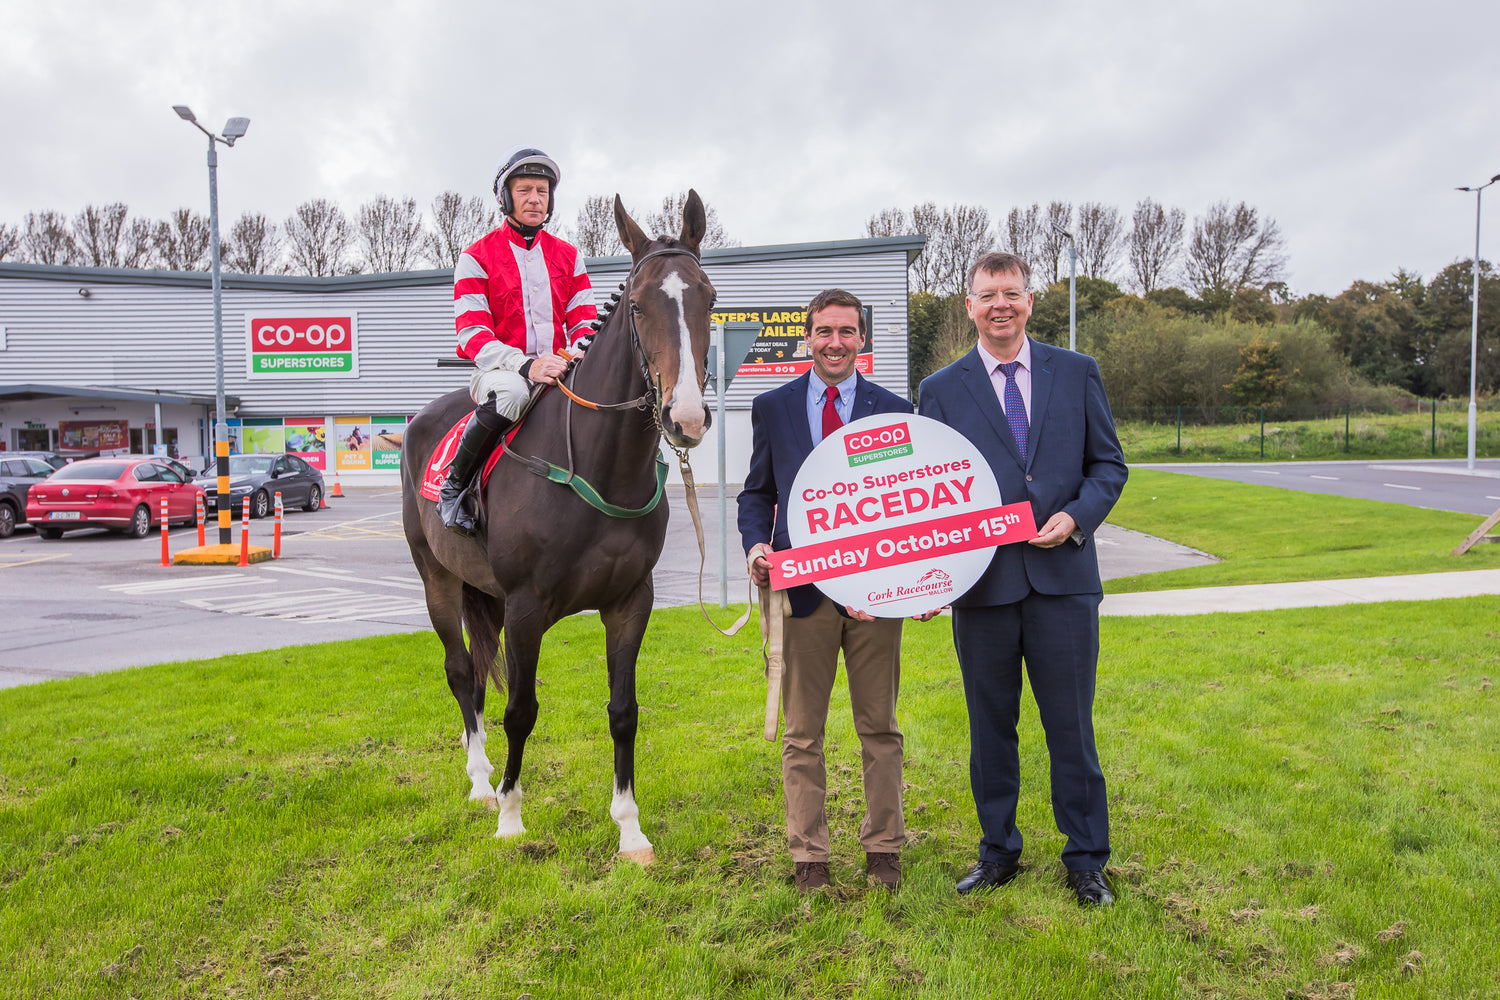 Dairygold Co-op Superstores welcomes Return of the Jumps at Cork Racecourse Mallow this October